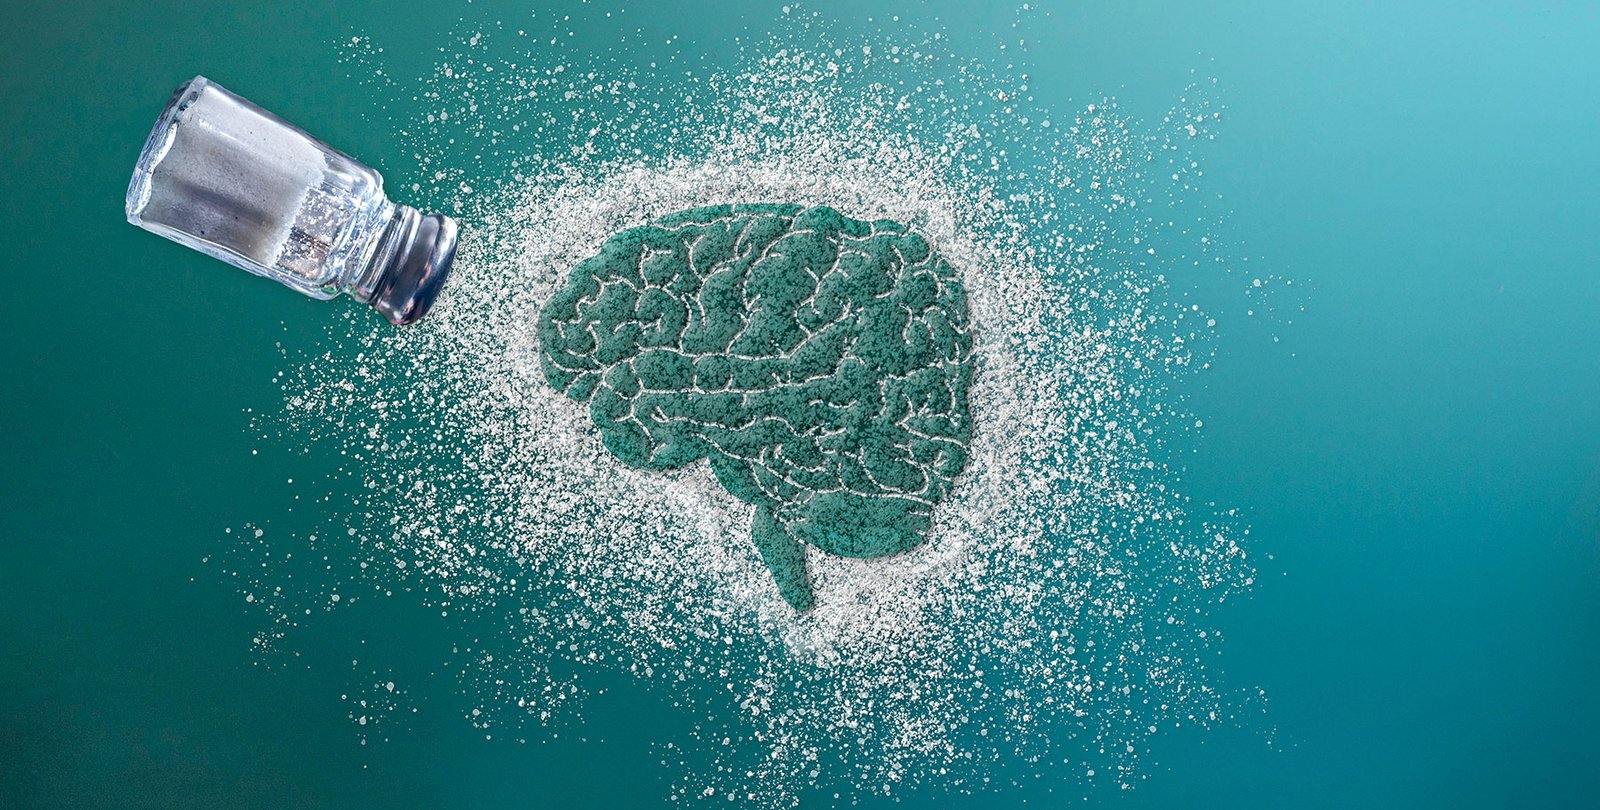 Newly Discovered Brain Circuit Controls An Aversion to Salty Tastes